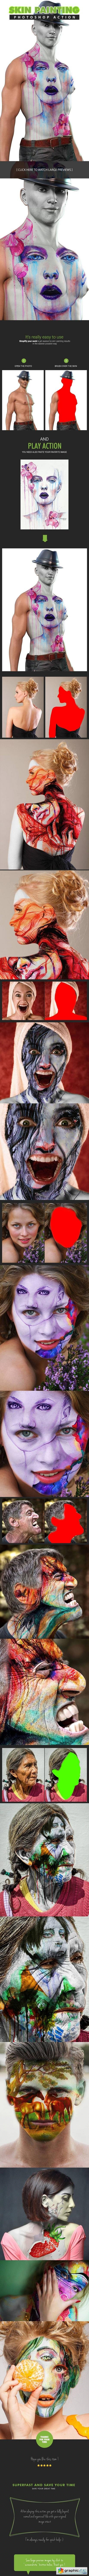 Skin Painting Photoshop Action